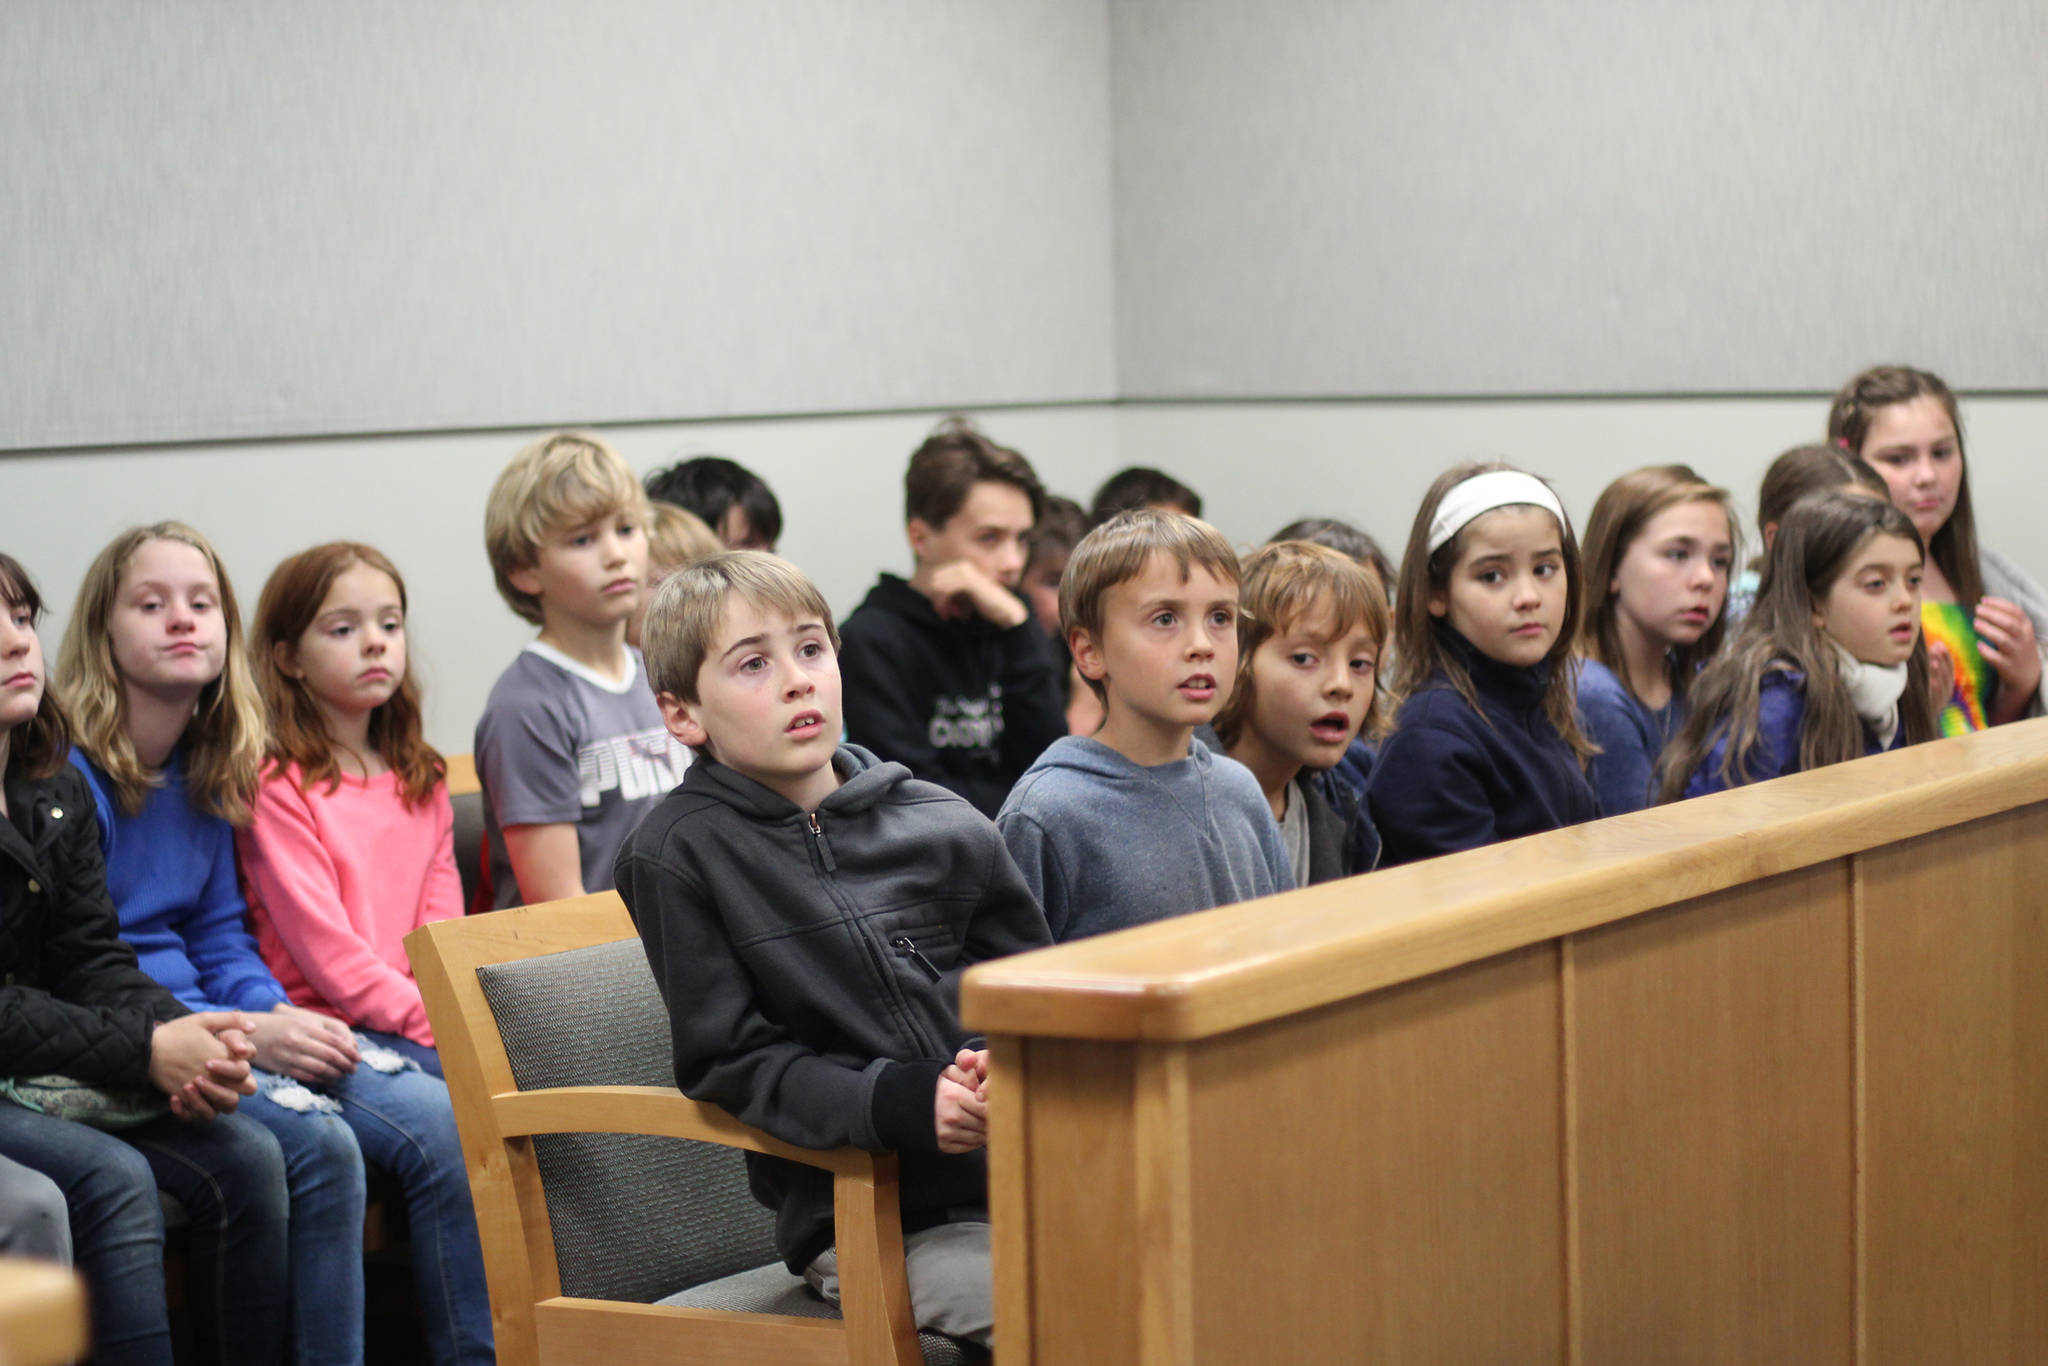 Students from Fireweed Academy listen to a presentation during an Oct. 8, 2018 field trip to the Homer Courthouse in Homer, Alaska. There, the learned more about the law, law enforcement and the inner workings of the court. (Photo by Megan Pacer/Homer News)